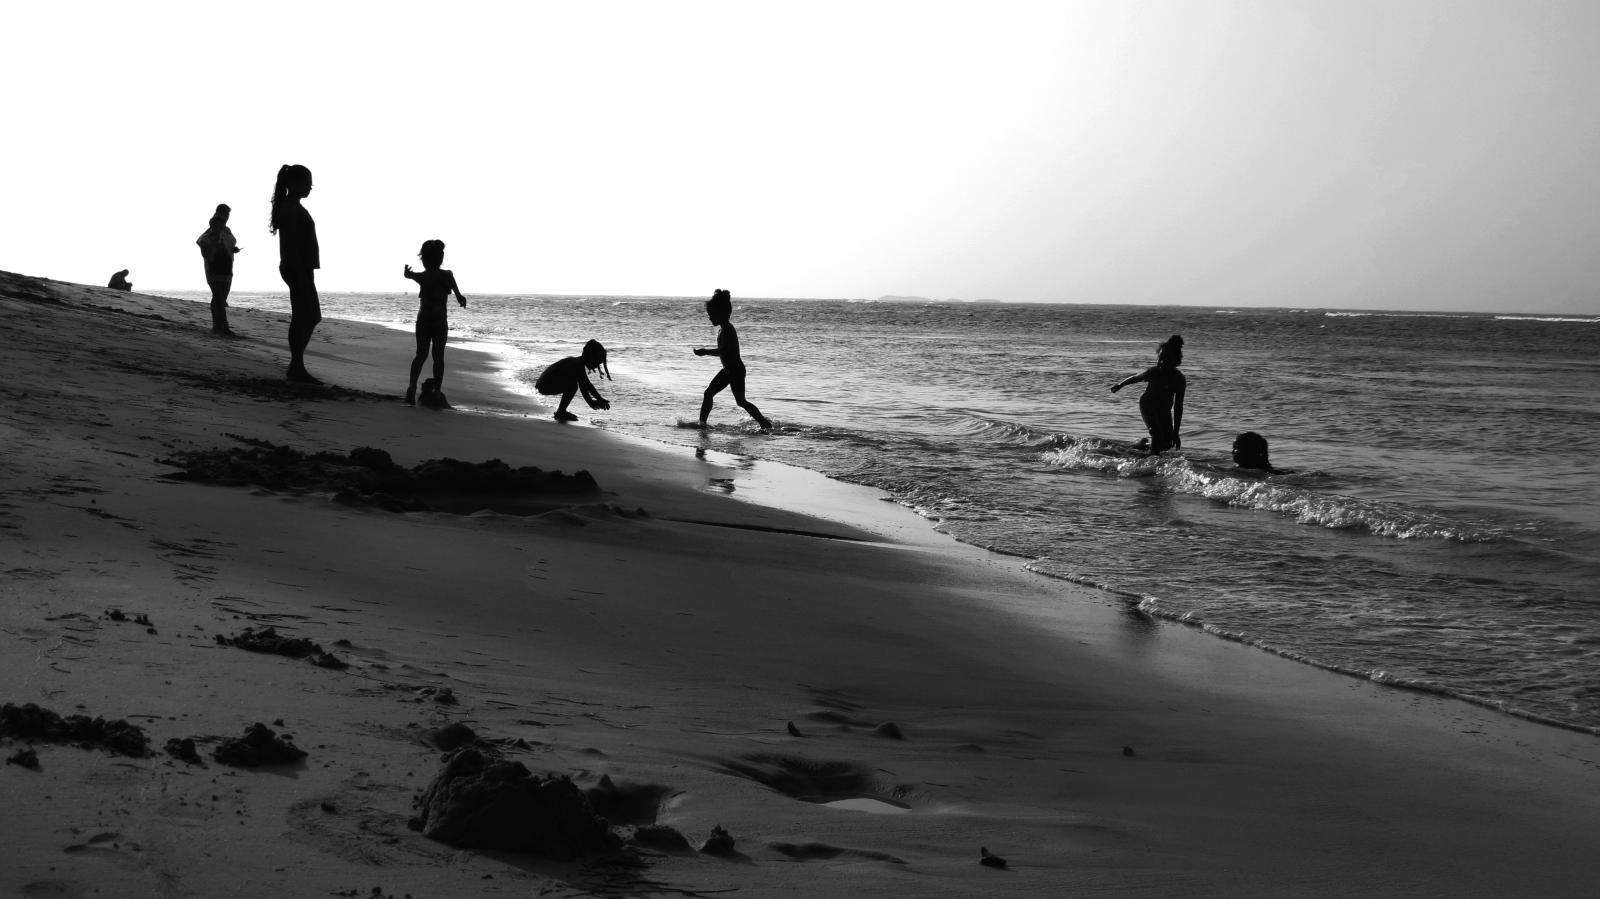 Playing on the beach | Buy this image